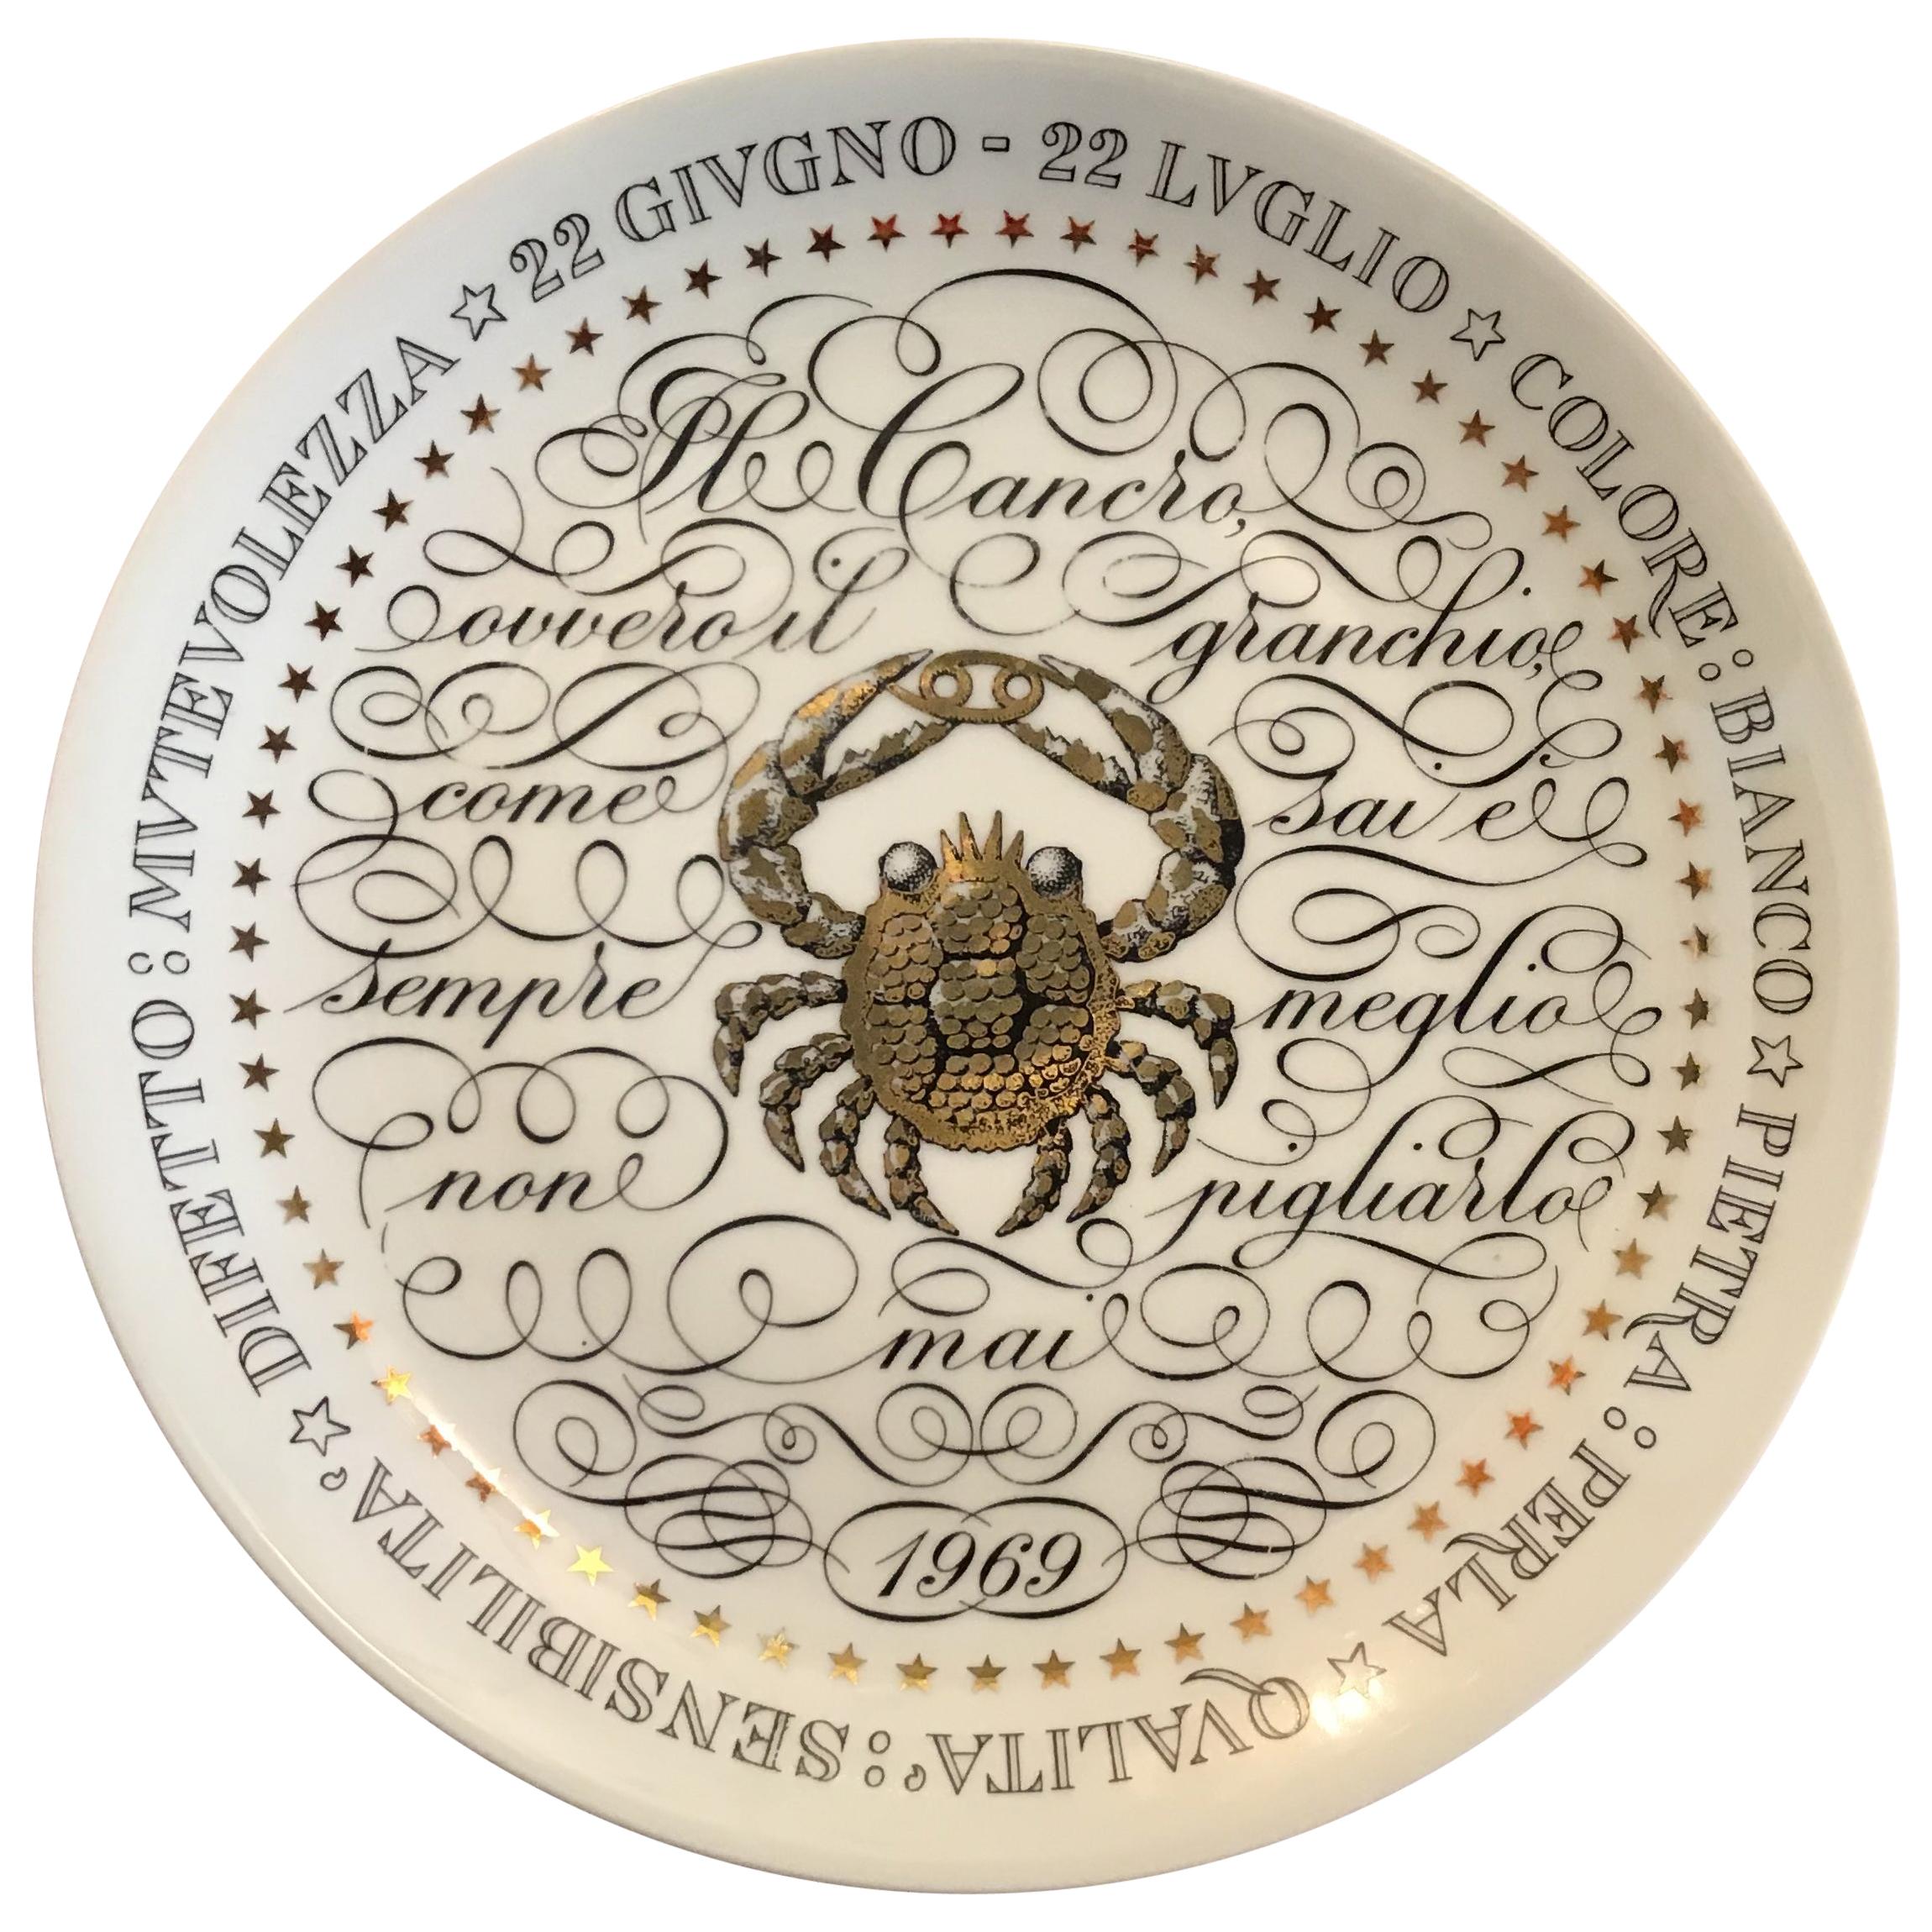 Piero Fornasetti Plate Zodiac Sign Cancer Porcelain 1969, Italy For Sale